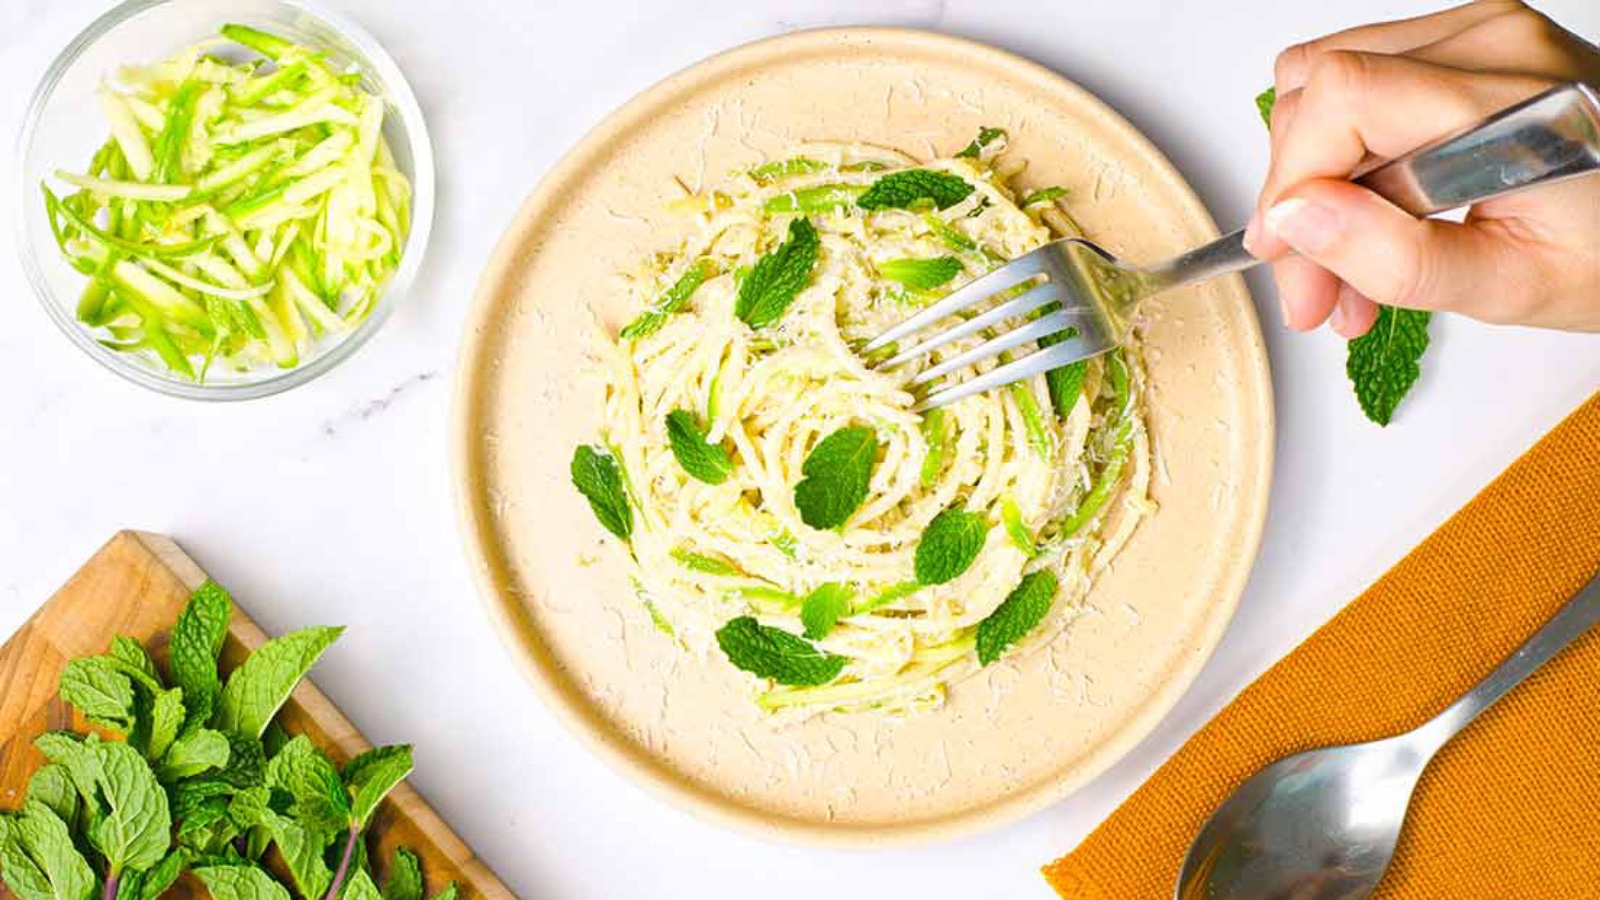 11 Easy Recipes To Use Up Your Zucchini Stash